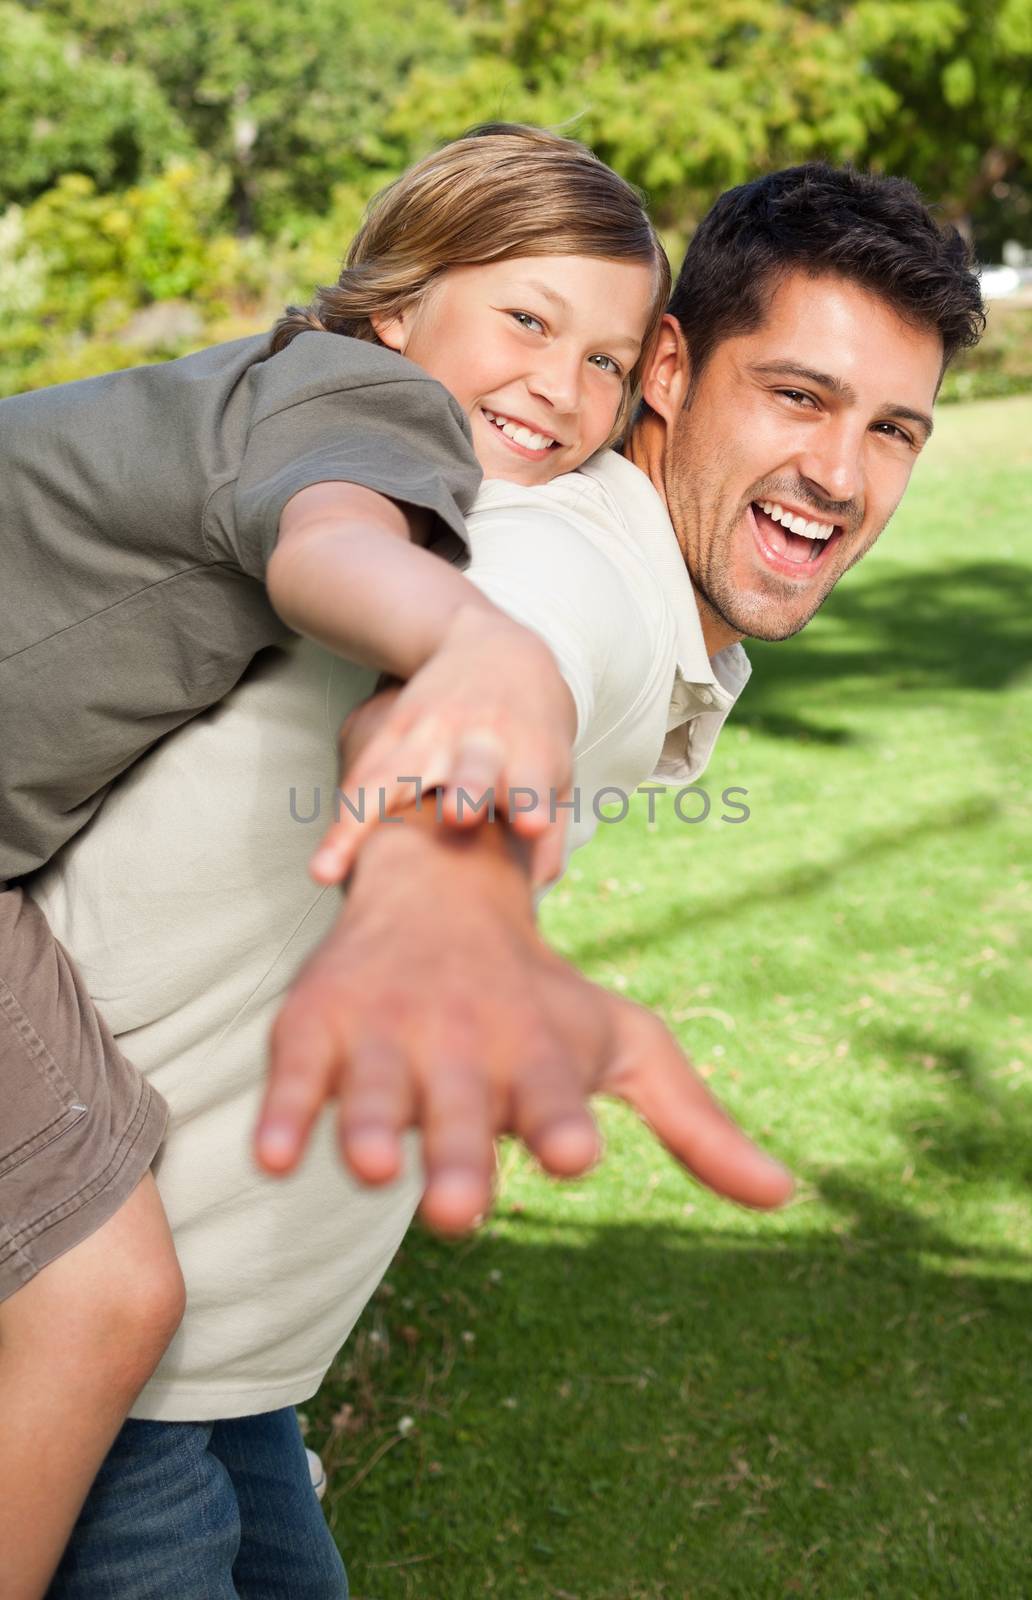 Father playing with his son in the park during the summer